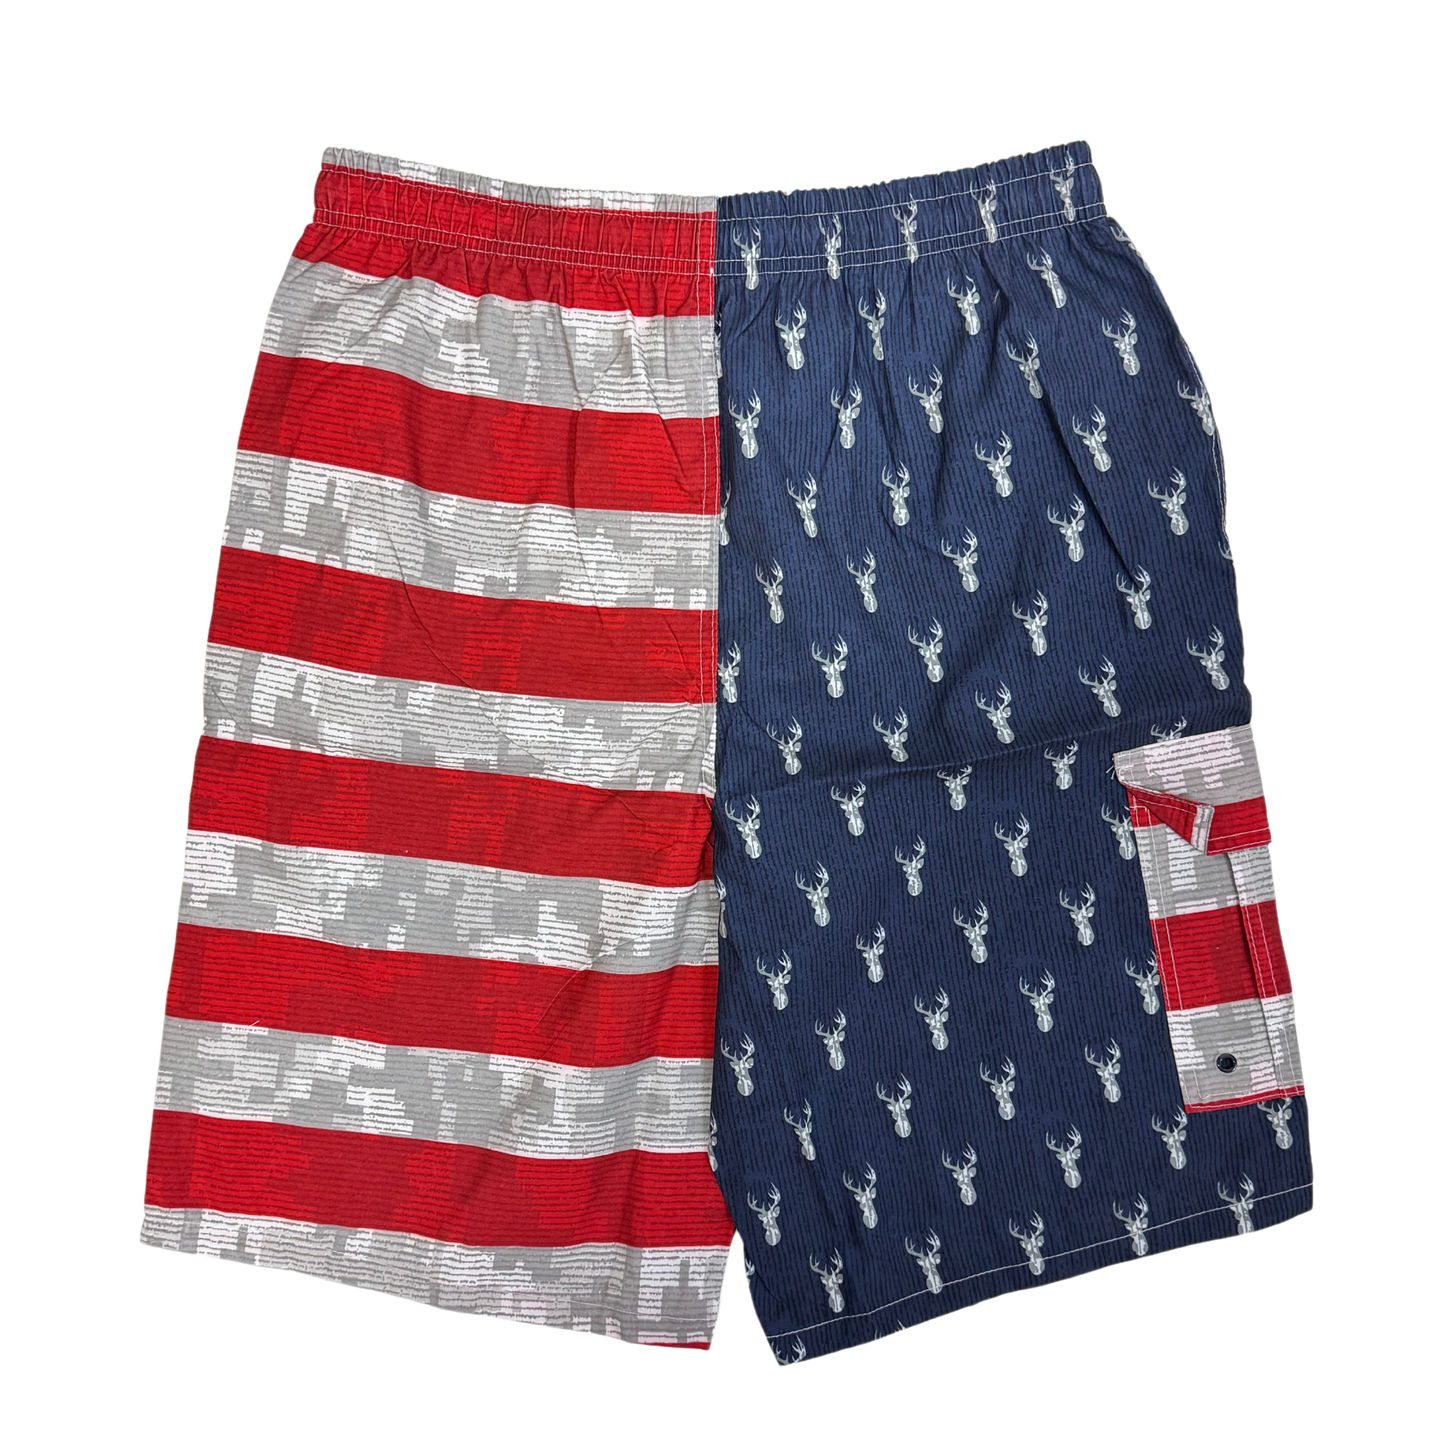 PREMIERE BATHING SUITS: USA RED WHITE BLUE DEERS